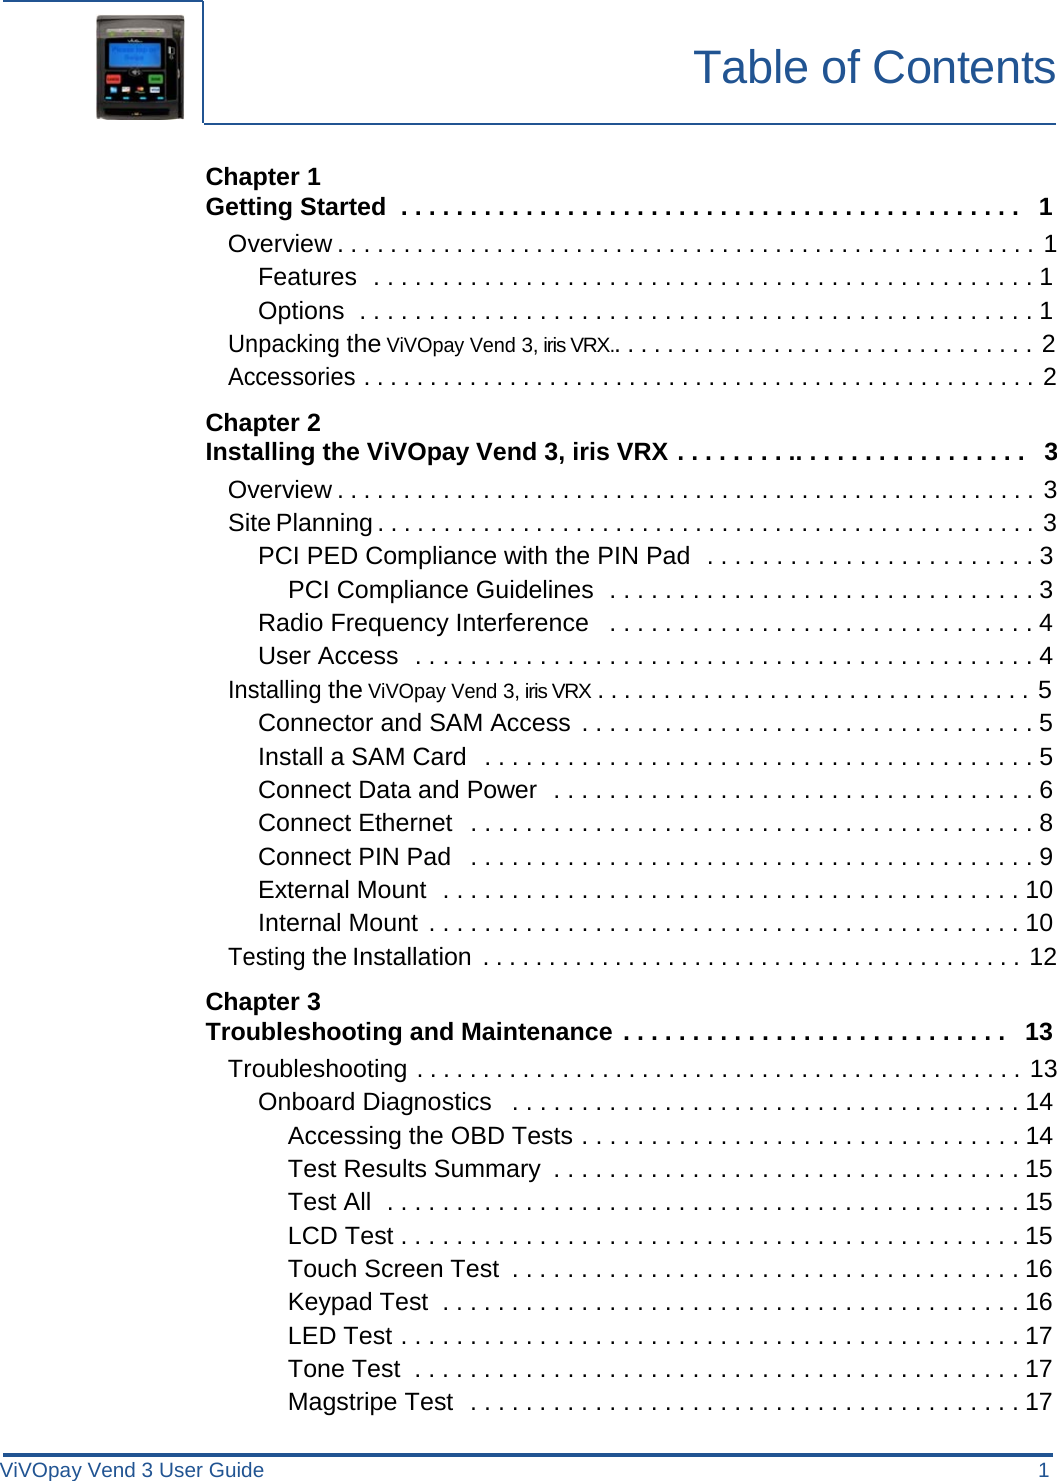 ViVOpay Vend 3 User Guide 1      Table of Contents    Chapter 1 Getting Started  . . . . . . . . . . . . . . . . . . . . . . . . . . . . . . . . . . . . . . . . . . . . .   1 Overview . . . . . . . . . . . . . . . . . . . . . . . . . . . . . . . . . . . . . . . . . . . . . . . . . . . . . 1 Features  . . . . . . . . . . . . . . . . . . . . . . . . . . . . . . . . . . . . . . . . . . . . . . . . 1 Options  . . . . . . . . . . . . . . . . . . . . . . . . . . . . . . . . . . . . . . . . . . . . . . . . . 1 Unpacking the ViVOpay Vend 3, iris VRX.. . . . . . . . . . . . . . . . . . . . . . . . . . . . . . . . 2 Accessories . . . . . . . . . . . . . . . . . . . . . . . . . . . . . . . . . . . . . . . . . . . . . . . . . . . 2  Chapter 2 Installing the ViVOpay Vend 3, iris VRX . . . . . . . . .. . . . . . . . . . . . . . . . .   3 Overview . . . . . . . . . . . . . . . . . . . . . . . . . . . . . . . . . . . . . . . . . . . . . . . . . . . . . 3 Site Planning . . . . . . . . . . . . . . . . . . . . . . . . . . . . . . . . . . . . . . . . . . . . . . . . . . 3 PCI PED Compliance with the PIN Pad  . . . . . . . . . . . . . . . . . . . . . . . . 3 PCI Compliance Guidelines  . . . . . . . . . . . . . . . . . . . . . . . . . . . . . . . 3 Radio Frequency Interference  . . . . . . . . . . . . . . . . . . . . . . . . . . . . . . . 4 User Access  . . . . . . . . . . . . . . . . . . . . . . . . . . . . . . . . . . . . . . . . . . . . . 4 Installing the ViVOpay Vend 3, iris VRX . . . . . . . . . . . . . . . . . . . . . . . . . . . . . . . . . 5 Connector and SAM Access . . . . . . . . . . . . . . . . . . . . . . . . . . . . . . . . . 5 Install a SAM Card  . . . . . . . . . . . . . . . . . . . . . . . . . . . . . . . . . . . . . . . . 5 Connect Data and Power  . . . . . . . . . . . . . . . . . . . . . . . . . . . . . . . . . . . 6 Connect Ethernet  . . . . . . . . . . . . . . . . . . . . . . . . . . . . . . . . . . . . . . . . . 8 Connect PIN Pad  . . . . . . . . . . . . . . . . . . . . . . . . . . . . . . . . . . . . . . . . . 9 External Mount  . . . . . . . . . . . . . . . . . . . . . . . . . . . . . . . . . . . . . . . . . . 10 Internal Mount . . . . . . . . . . . . . . . . . . . . . . . . . . . . . . . . . . . . . . . . . . . 10 Testing the Installation  . . . . . . . . . . . . . . . . . . . . . . . . . . . . . . . . . . . . . . . . . 12  Chapter 3 Troubleshooting and Maintenance . . . . . . . . . . . . . . . . . . . . . . . . . . . .  13 Troubleshooting . . . . . . . . . . . . . . . . . . . . . . . . . . . . . . . . . . . . . . . . . . . . . . 13 Onboard Diagnostics  . . . . . . . . . . . . . . . . . . . . . . . . . . . . . . . . . . . . . 14 Accessing the OBD Tests . . . . . . . . . . . . . . . . . . . . . . . . . . . . . . . . 14 Test Results Summary . . . . . . . . . . . . . . . . . . . . . . . . . . . . . . . . . . 15 Test All  . . . . . . . . . . . . . . . . . . . . . . . . . . . . . . . . . . . . . . . . . . . . . . 15 LCD Test . . . . . . . . . . . . . . . . . . . . . . . . . . . . . . . . . . . . . . . . . . . . . 15 Touch Screen Test . . . . . . . . . . . . . . . . . . . . . . . . . . . . . . . . . . . . . 16 Keypad Test . . . . . . . . . . . . . . . . . . . . . . . . . . . . . . . . . . . . . . . . . . 16 LED Test . . . . . . . . . . . . . . . . . . . . . . . . . . . . . . . . . . . . . . . . . . . . . 17 Tone Test . . . . . . . . . . . . . . . . . . . . . . . . . . . . . . . . . . . . . . . . . . . . 17 Magstripe Test  . . . . . . . . . . . . . . . . . . . . . . . . . . . . . . . . . . . . . . . . 17 